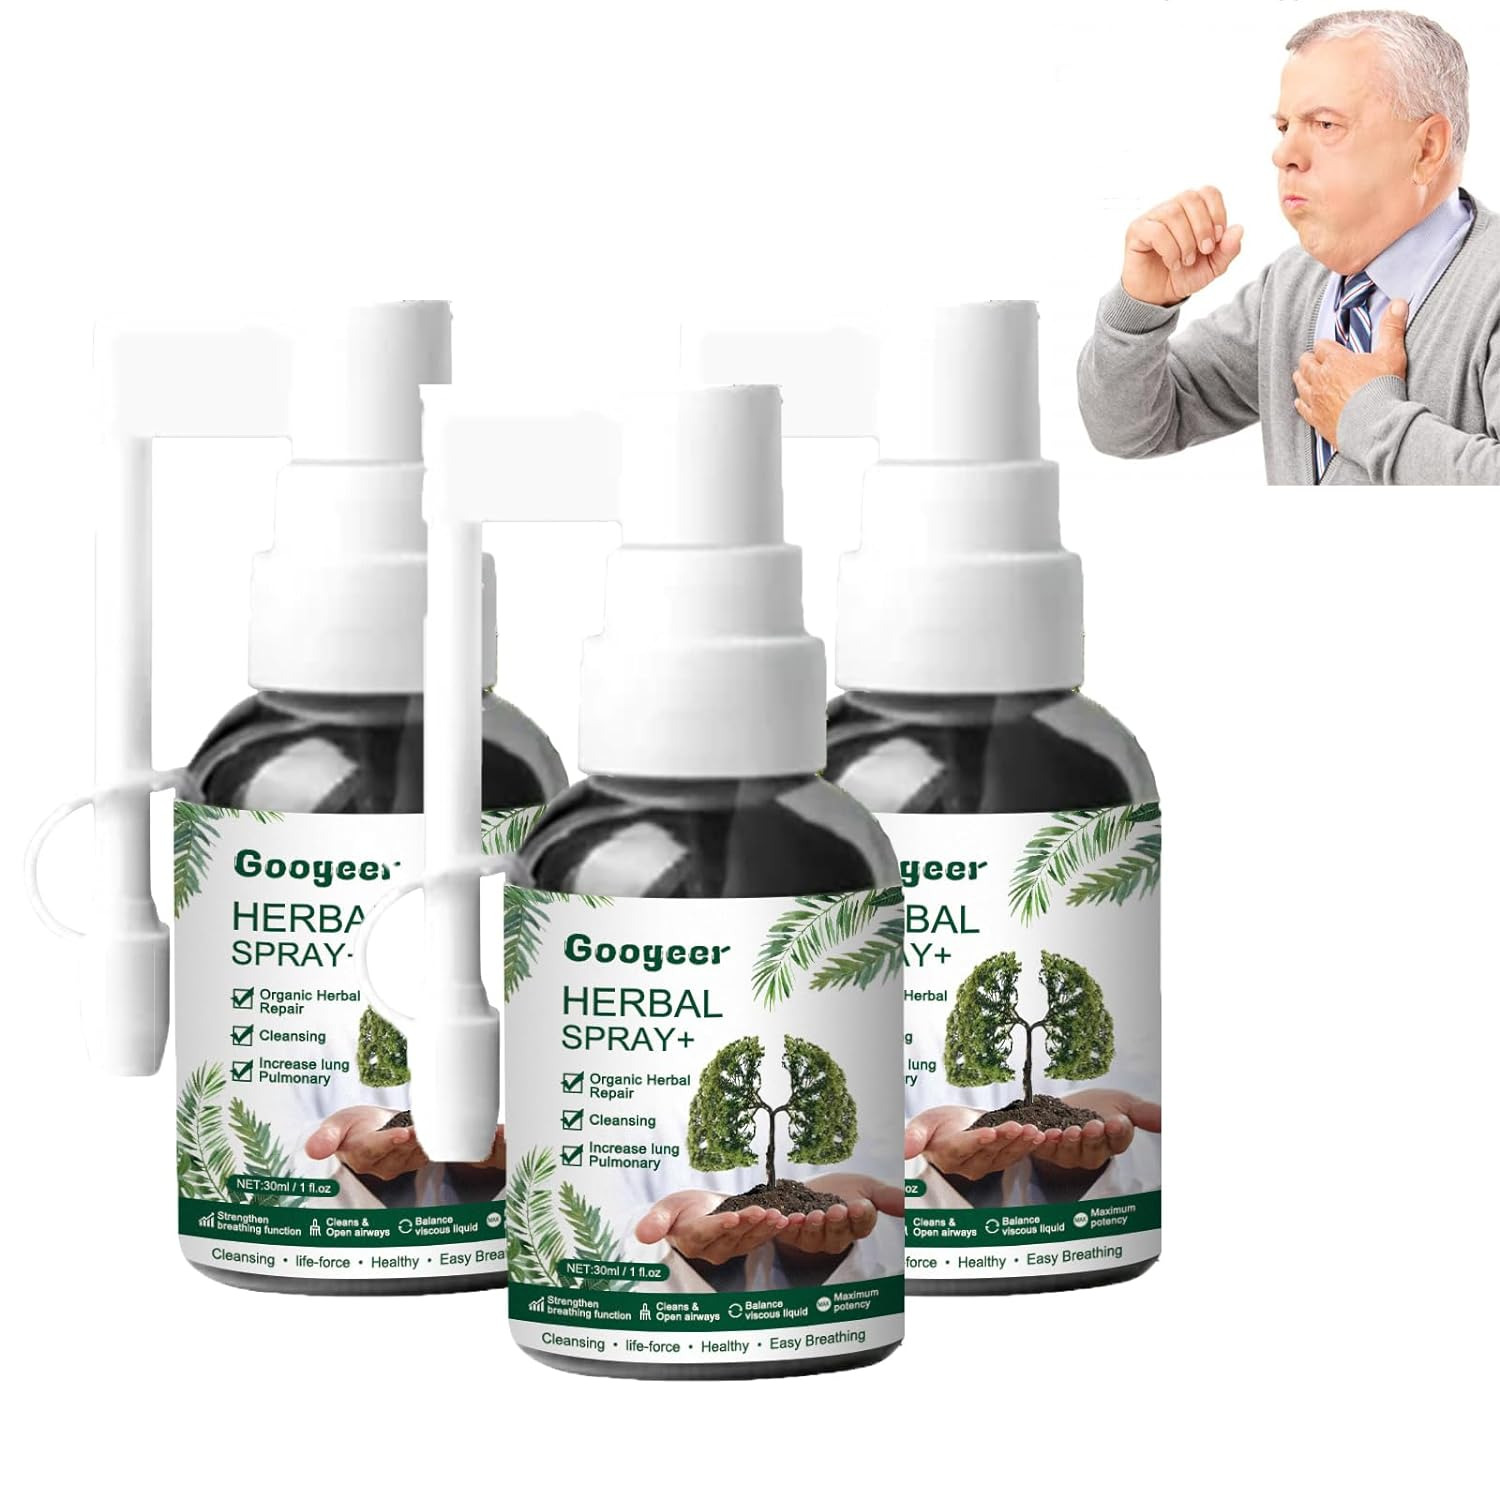 Herbal Lung Cleansing Spray,Respinature,Googeer Herbal Lung,Best Respinature Her